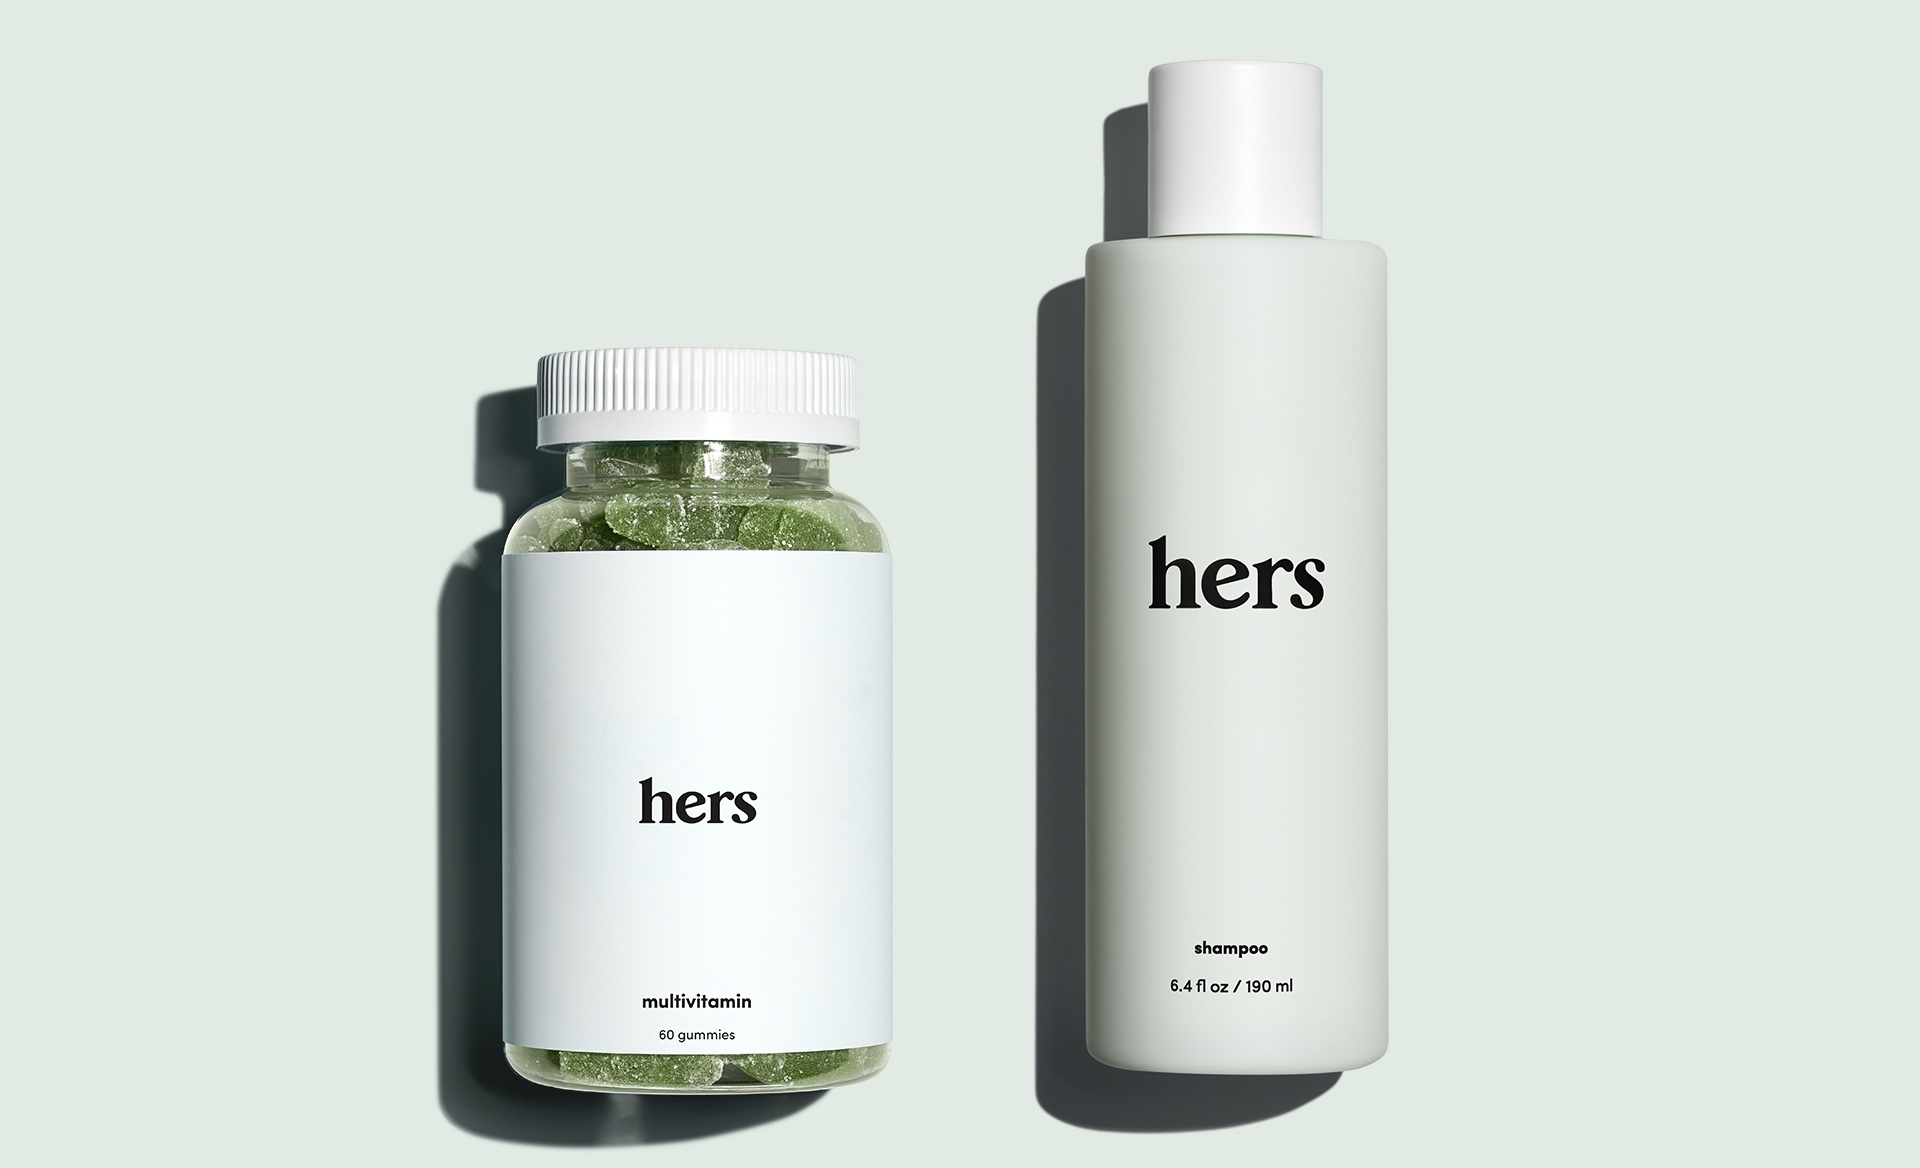 Men's wellness startup Hims has launched a line of women's health